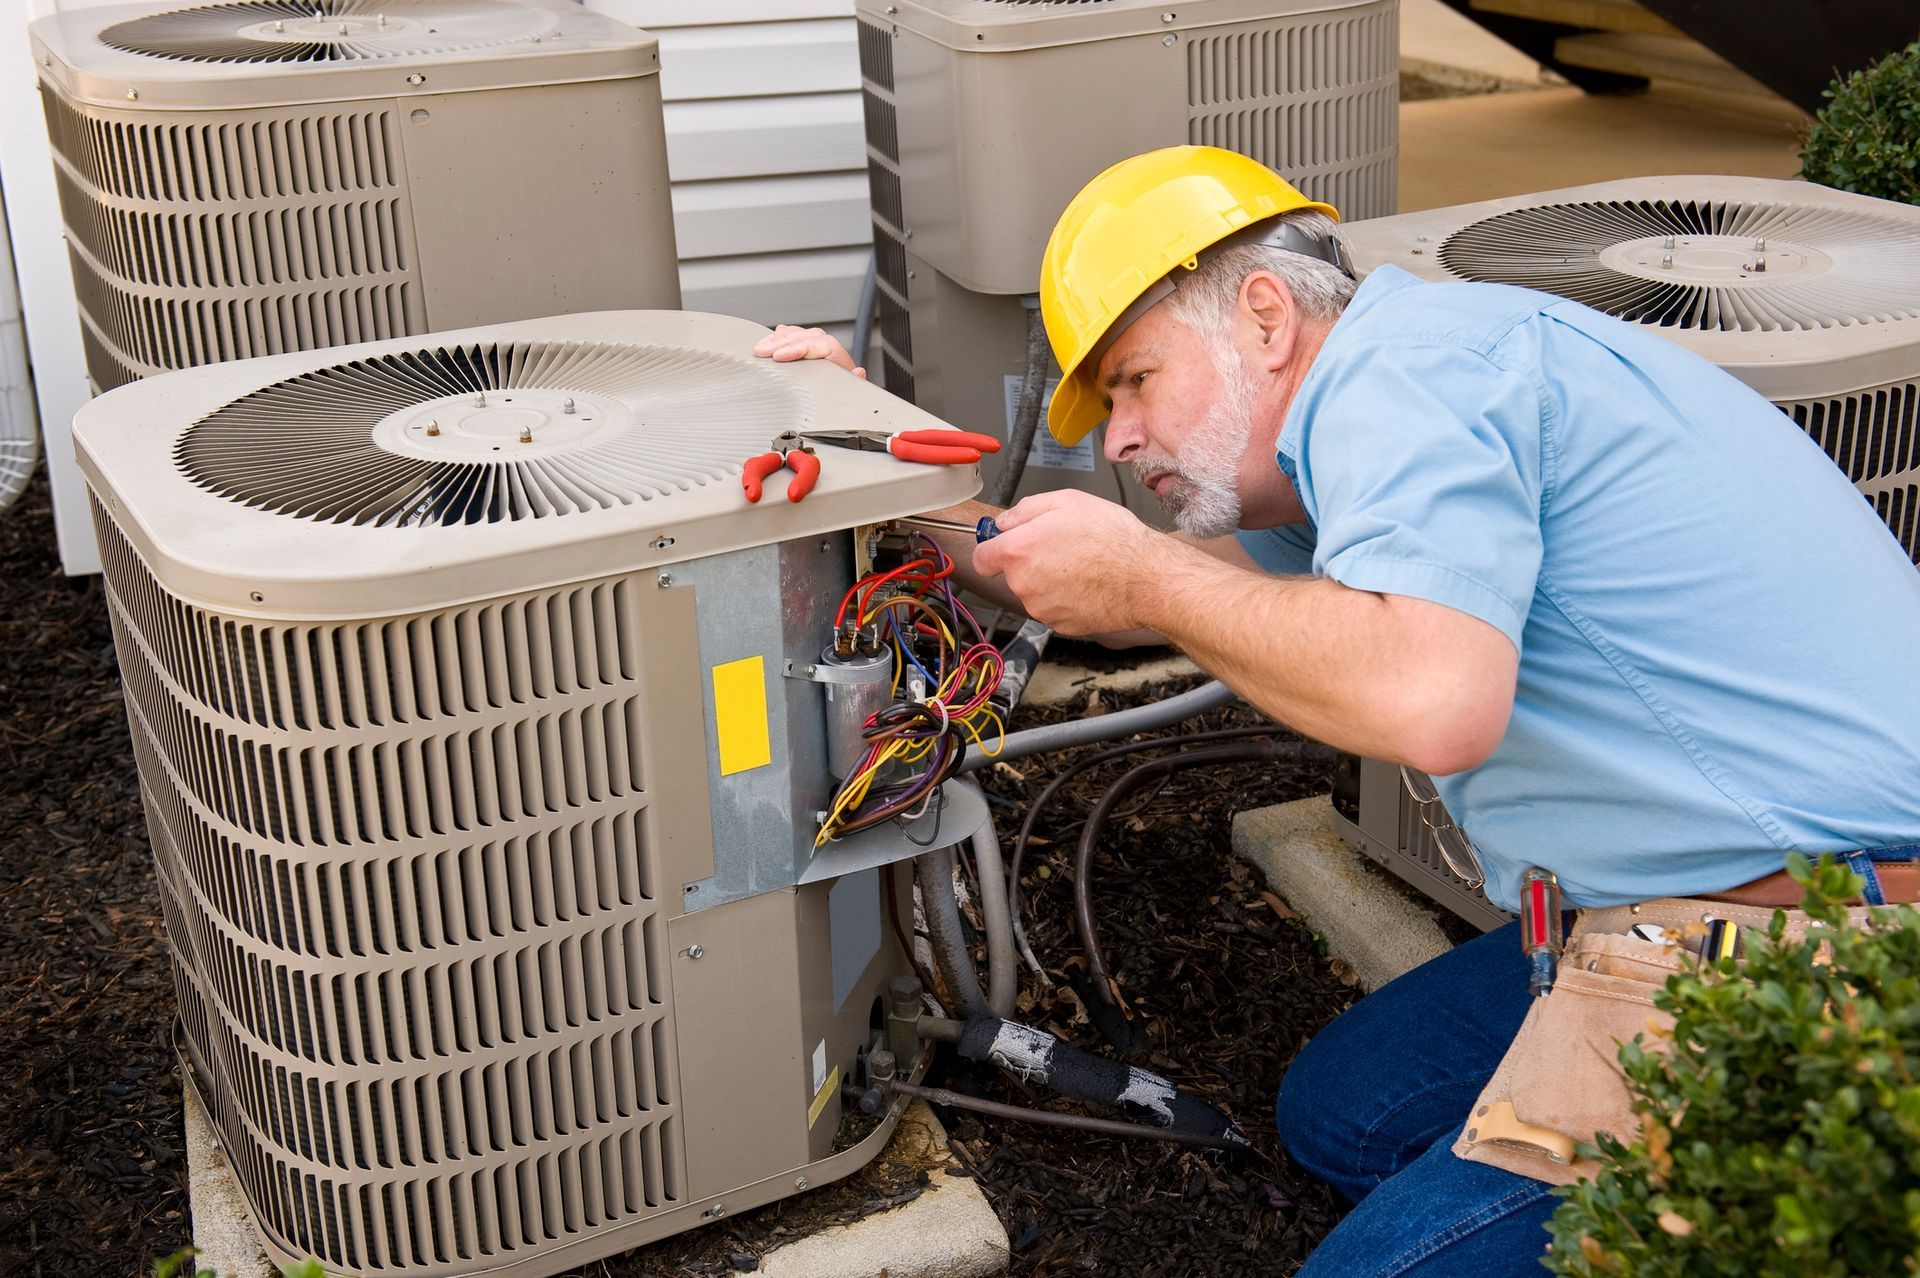 A man wearing a hard hat is working on an air conditioner.